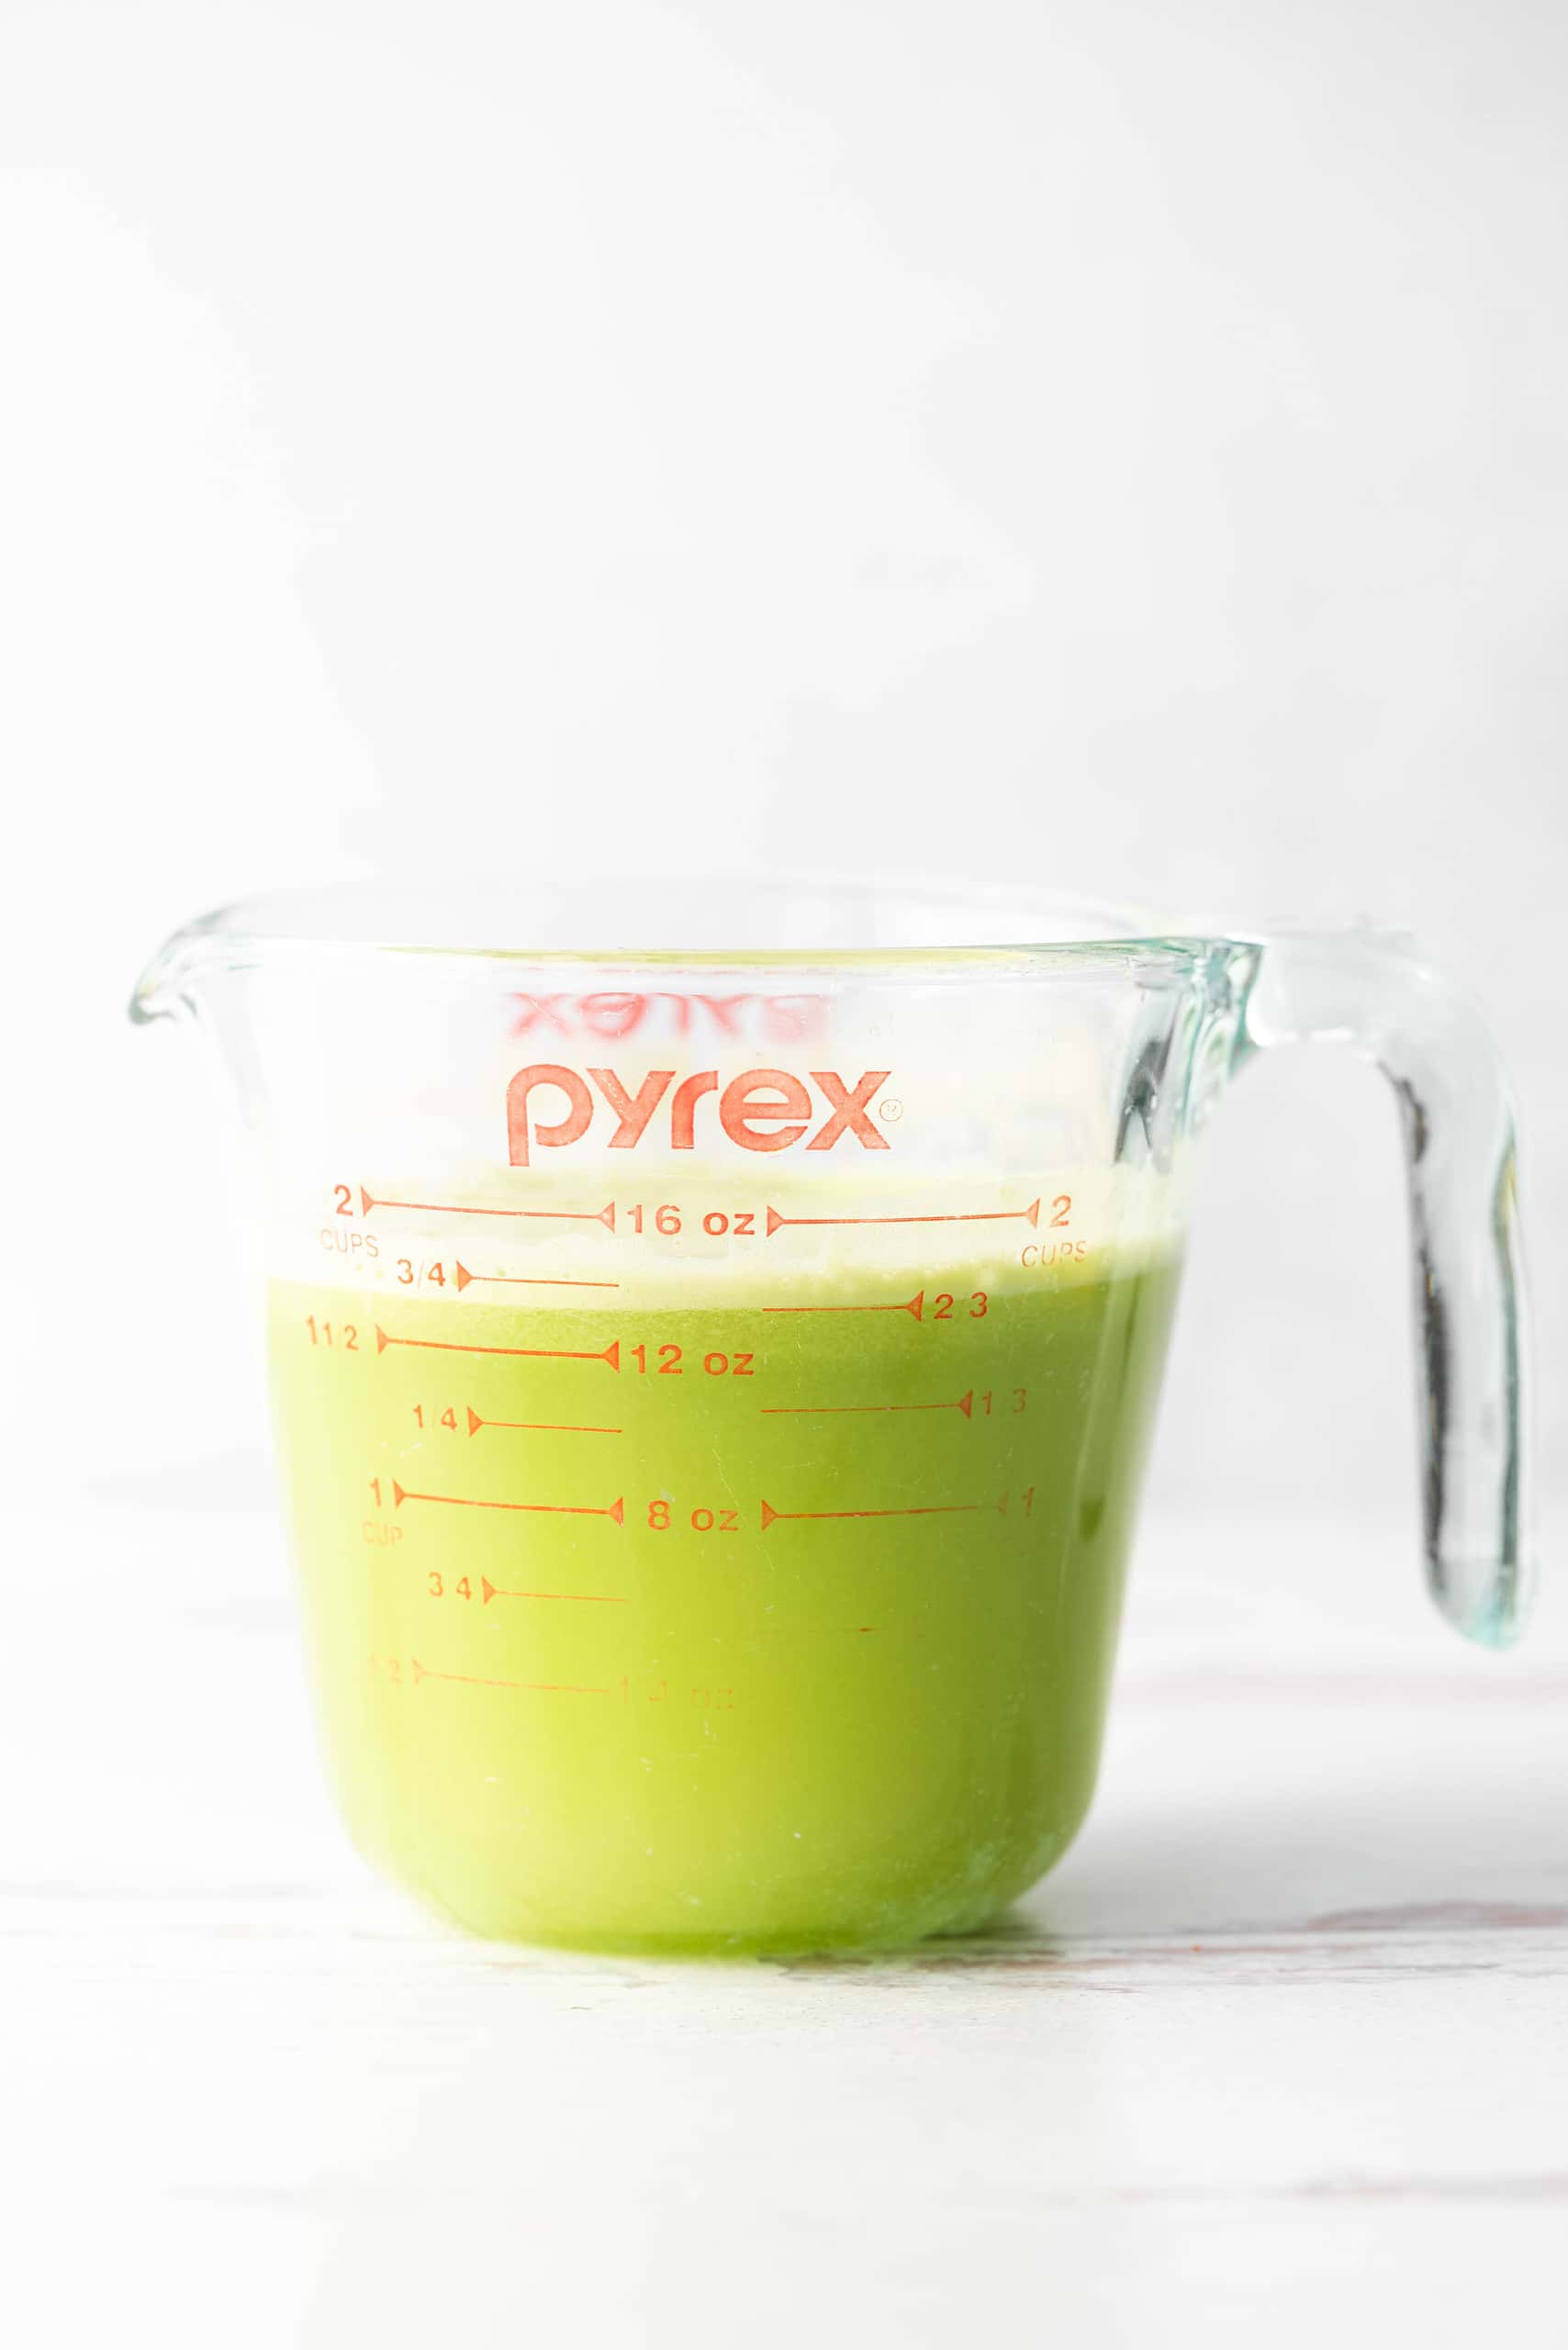 Celery juice in a pyrex on a white background. 